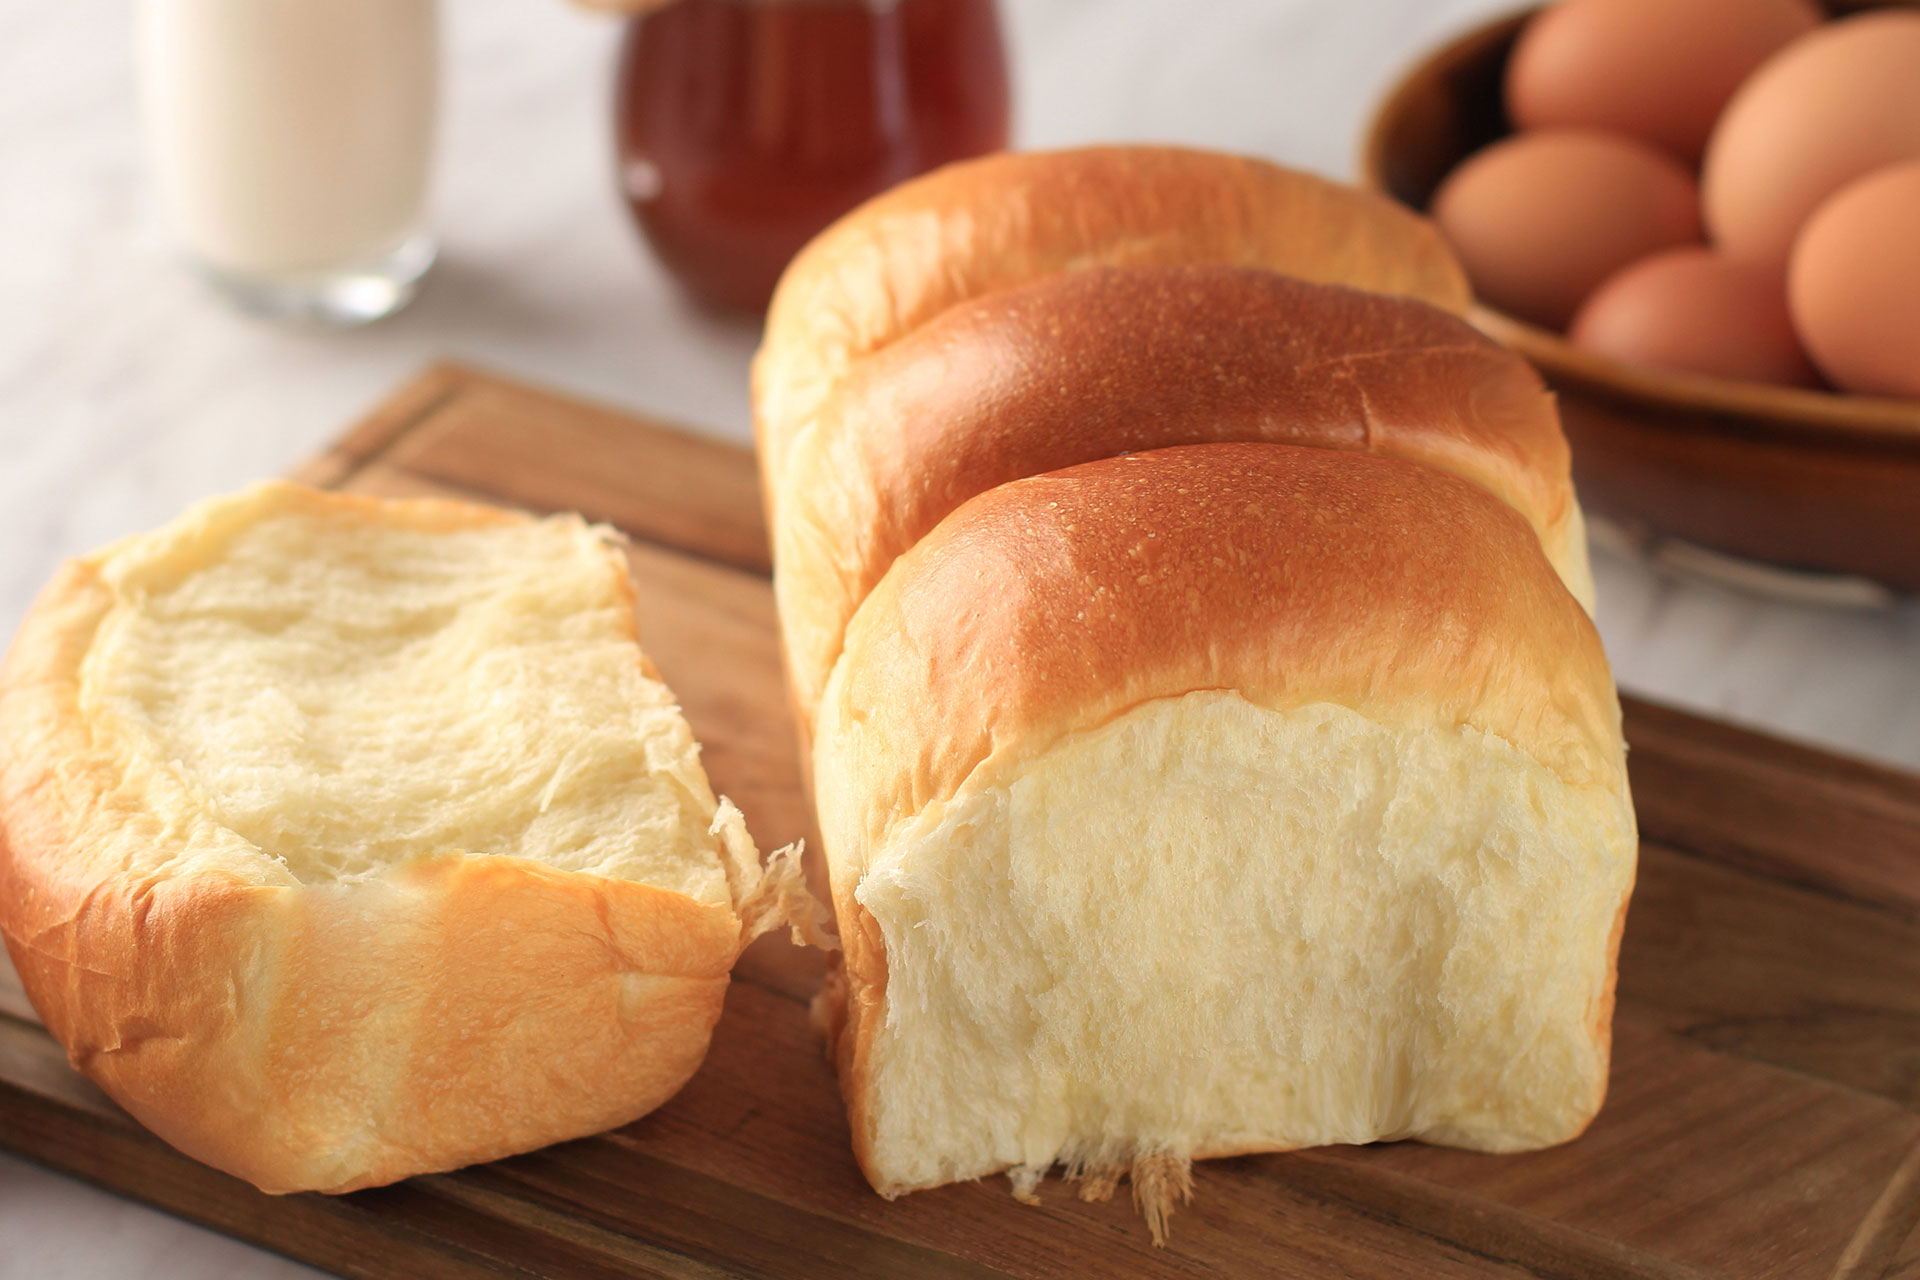 10 Asian Breads to Brighten Your Day